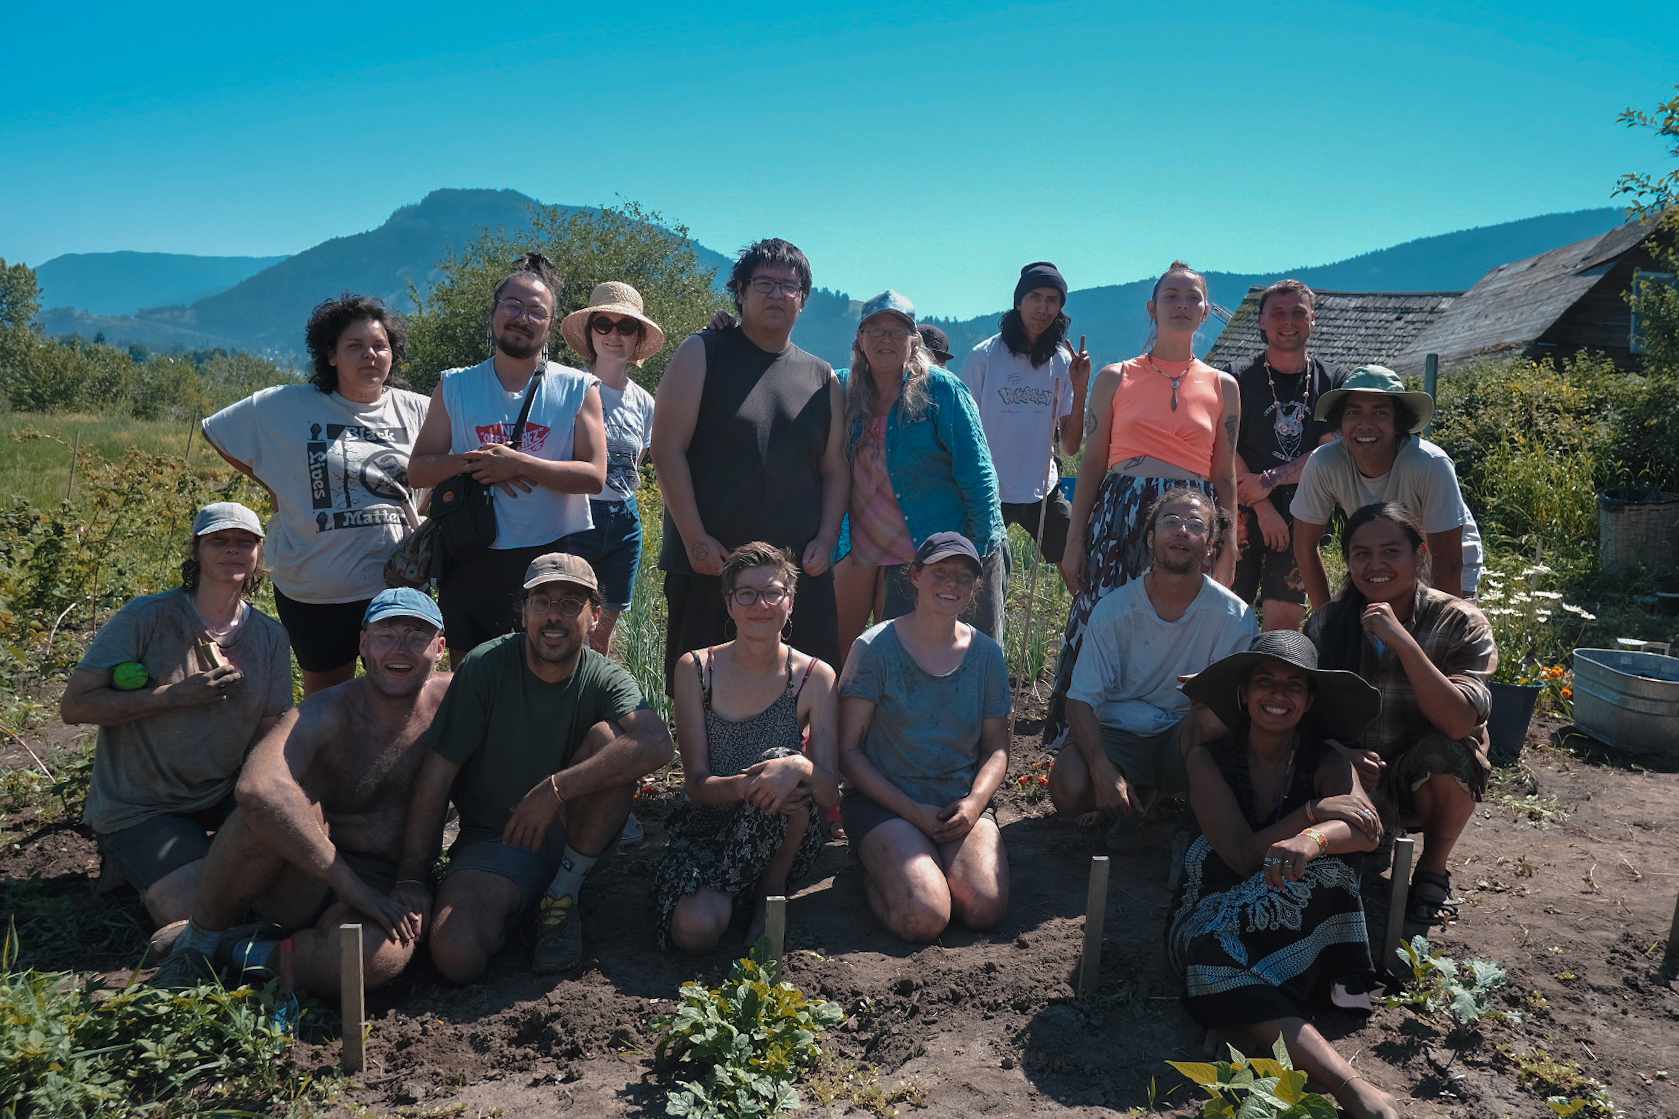 A group of people, one row kneeling and one row standing, pose in a garden with a mountain range behind them